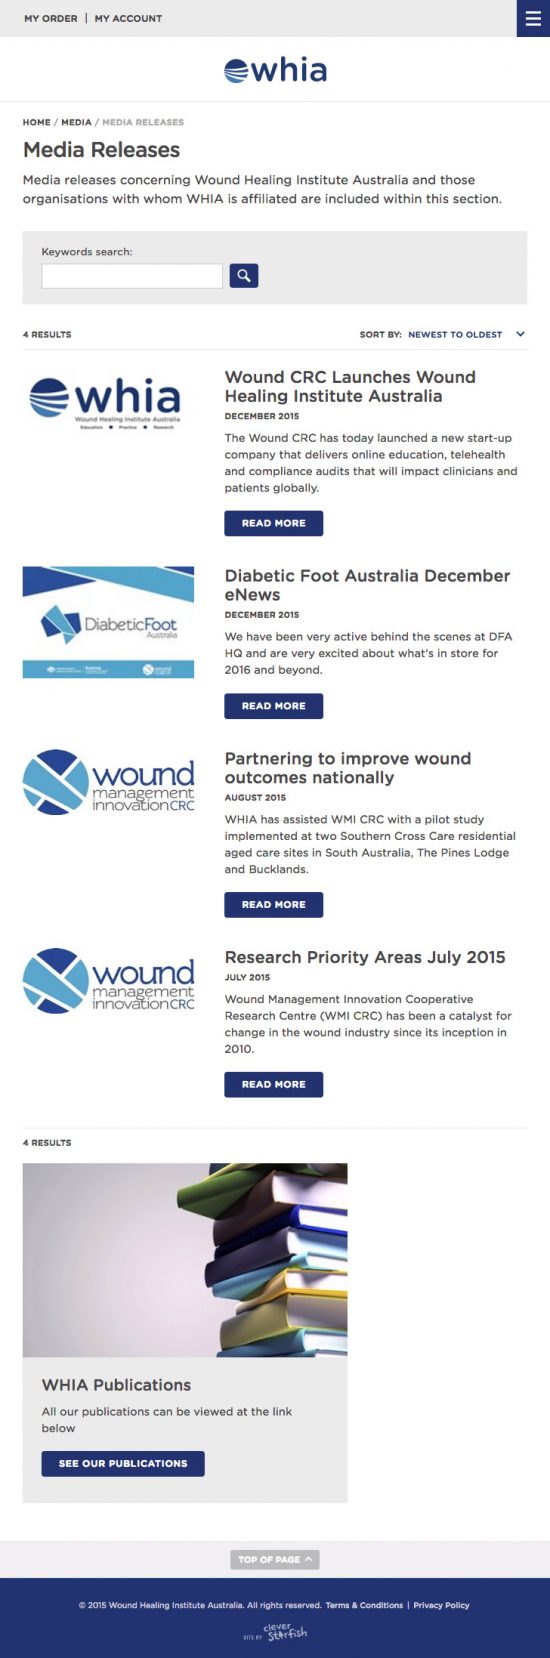 Wound Healing Institue Australia -Media Releases - Tablet